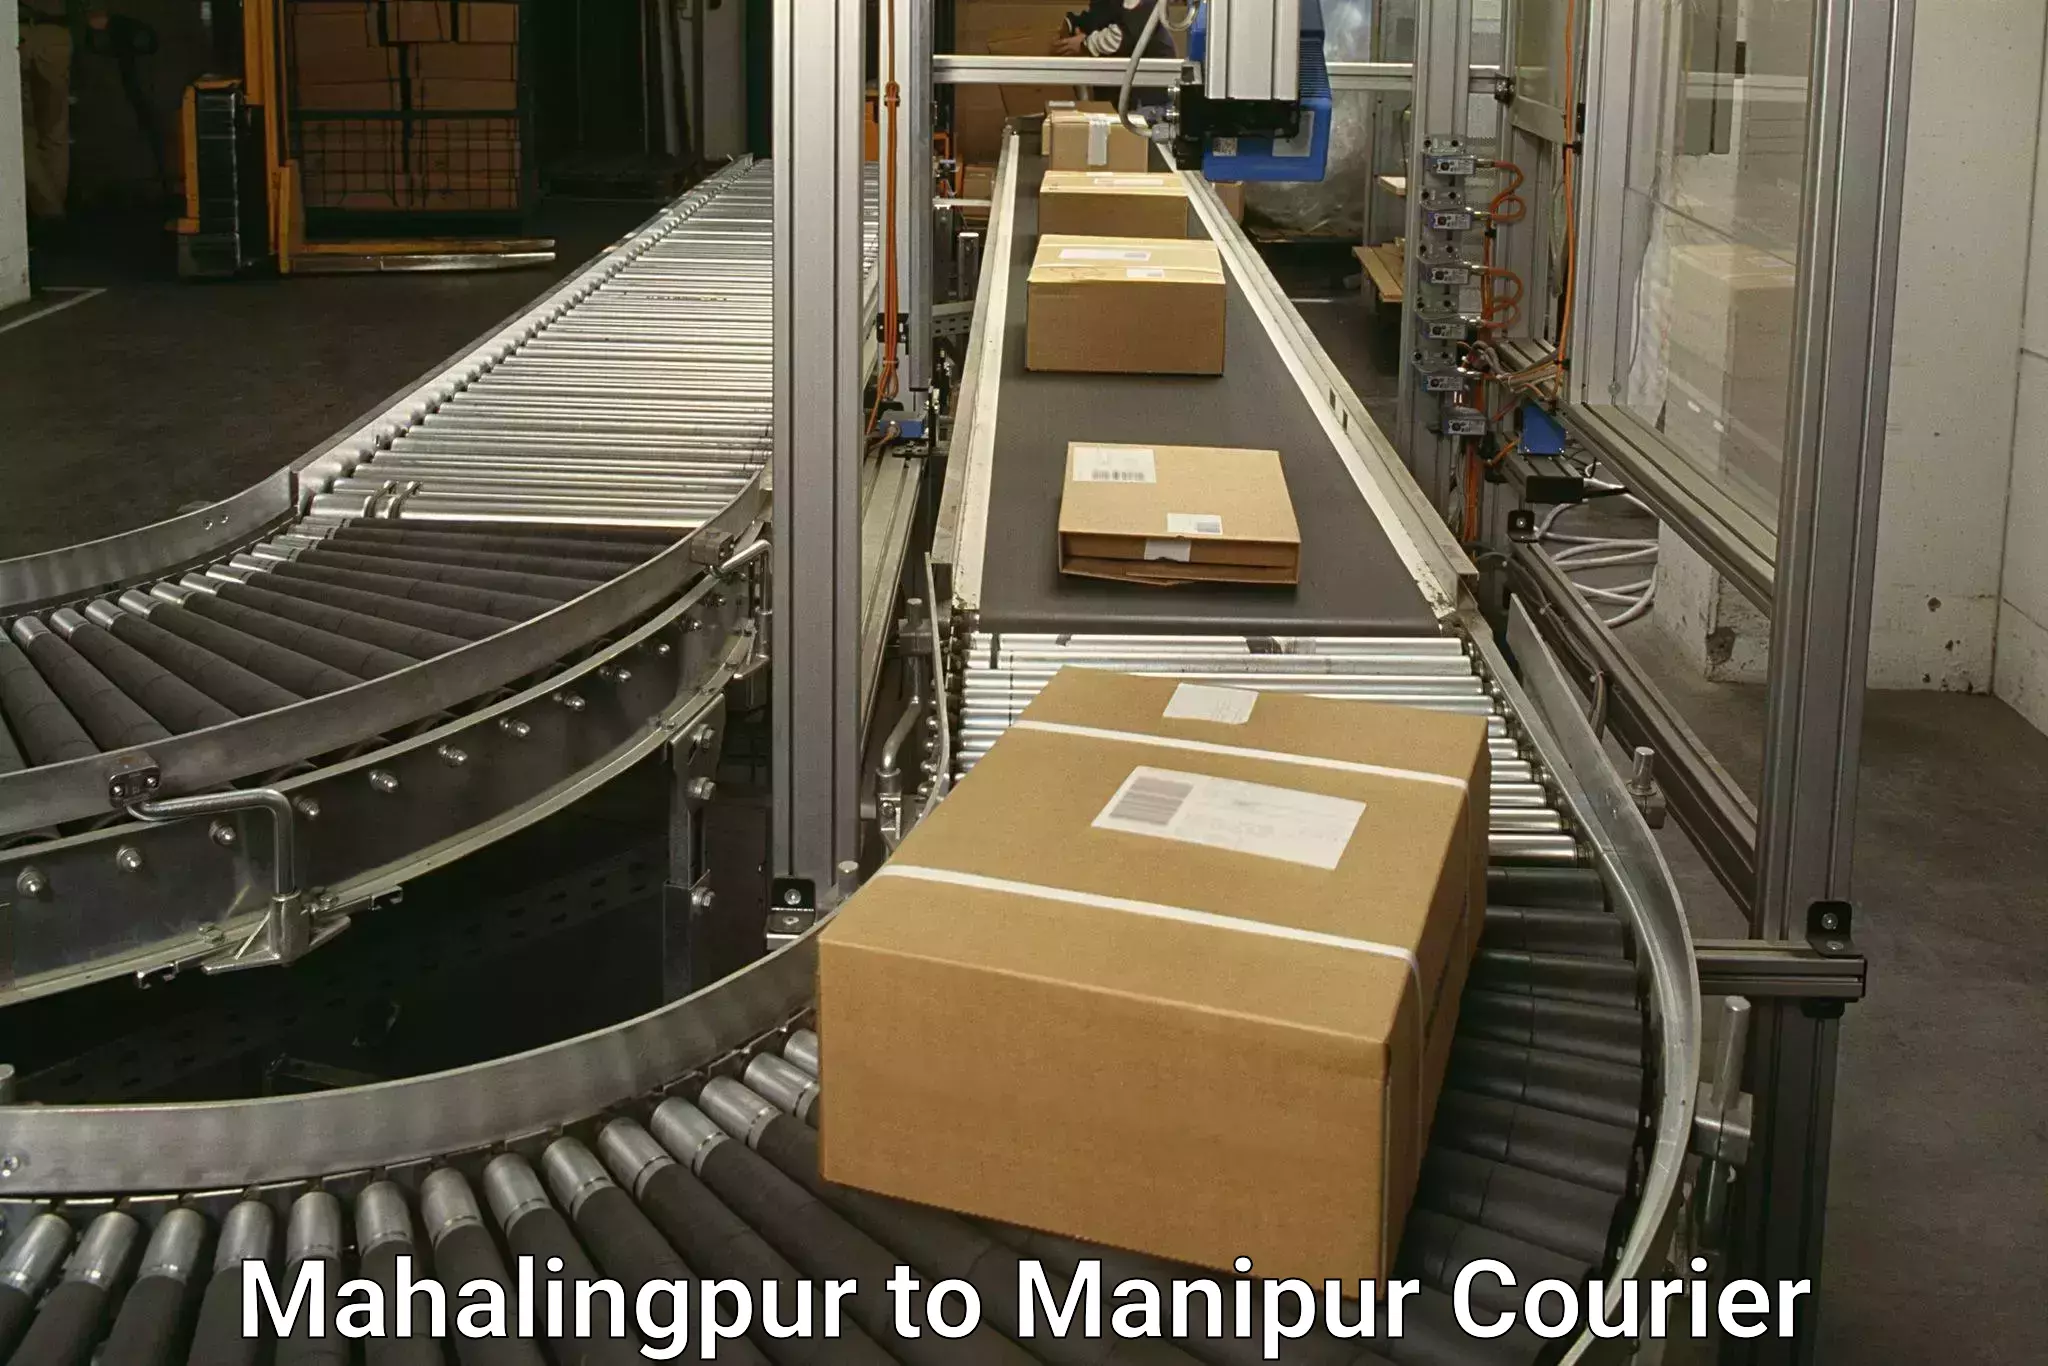 Courier services in Mahalingpur to Chandel